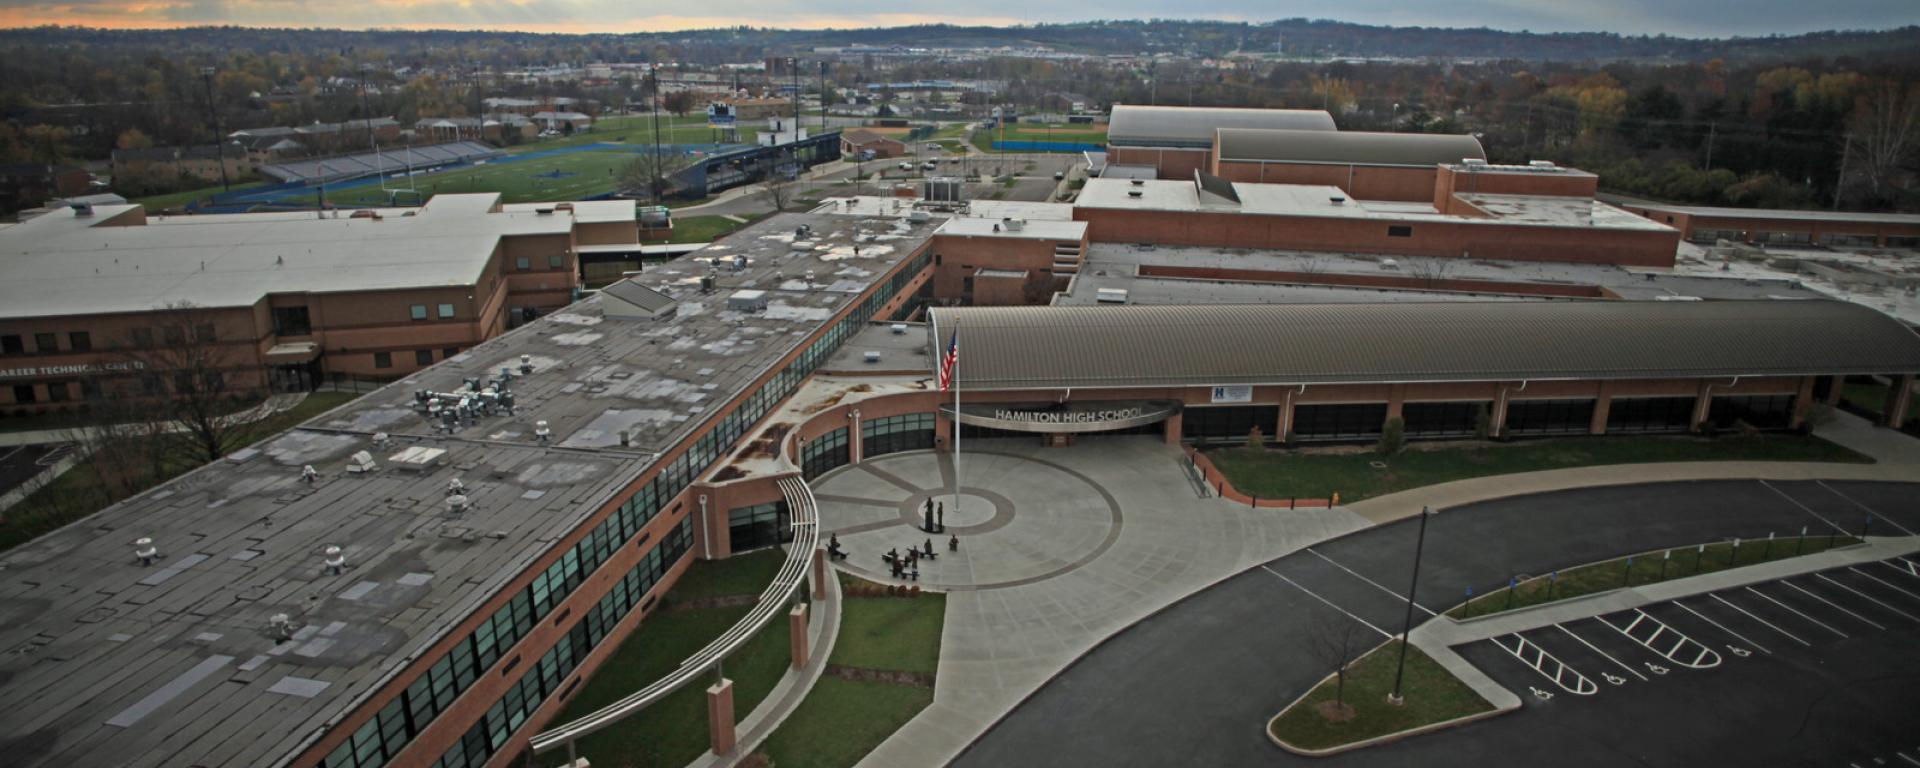 aerial view of entrance and landscaping of school